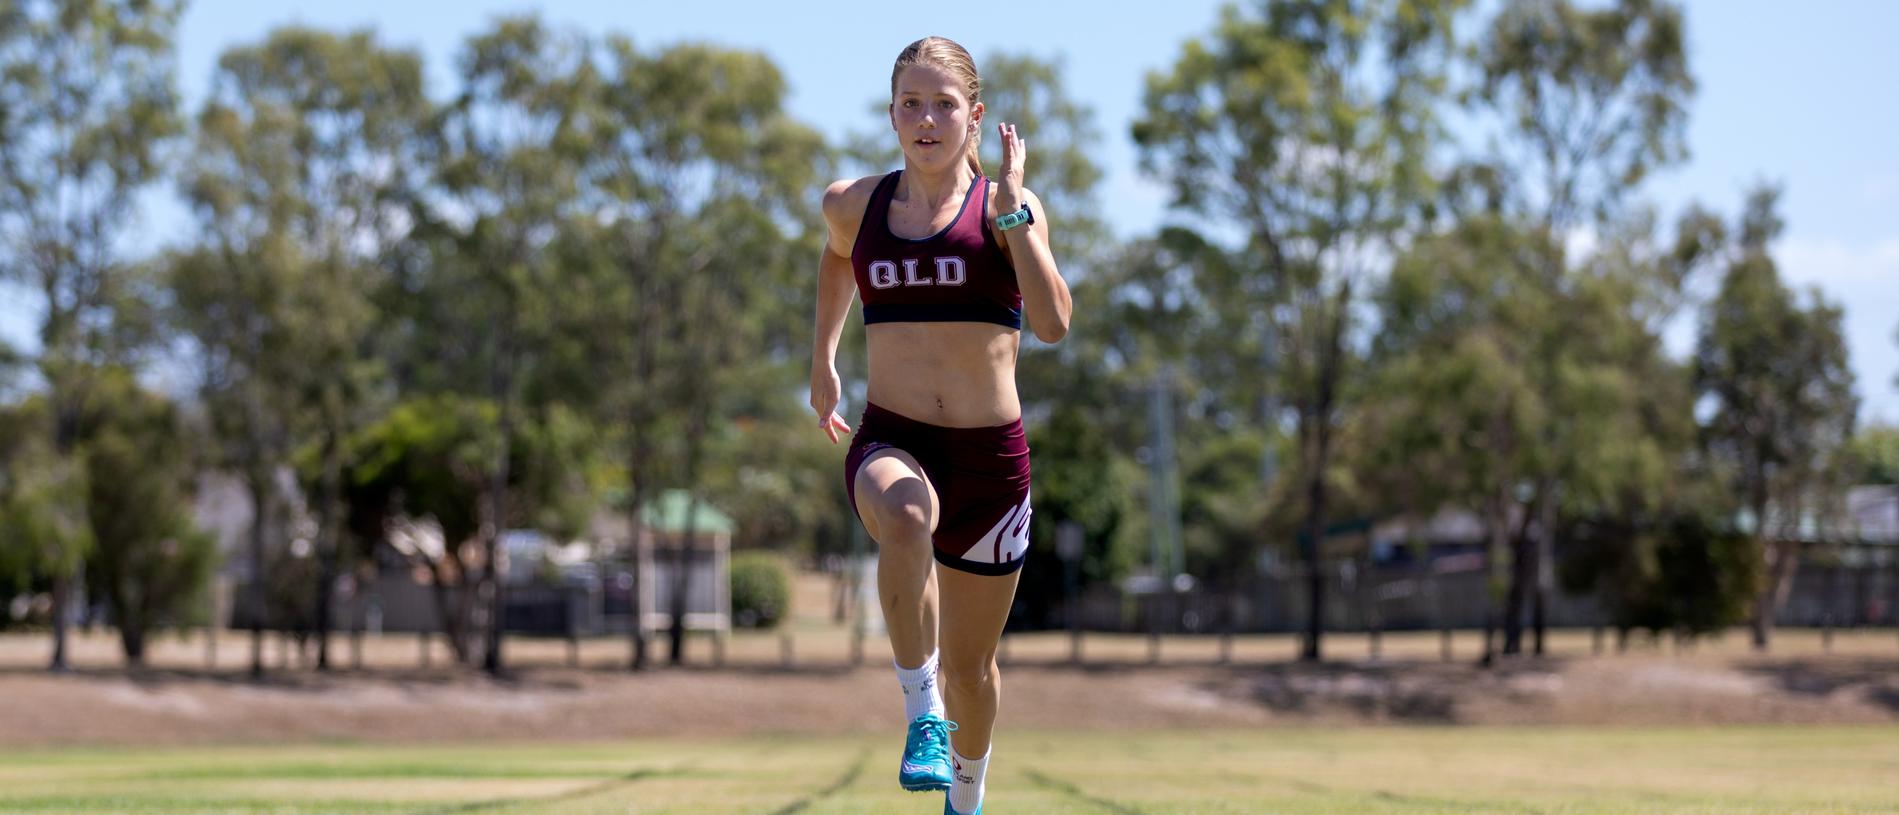 Deception Bay Little Athletics Athlete Ella Booker Has Sights Set On Big Things In 2019 The